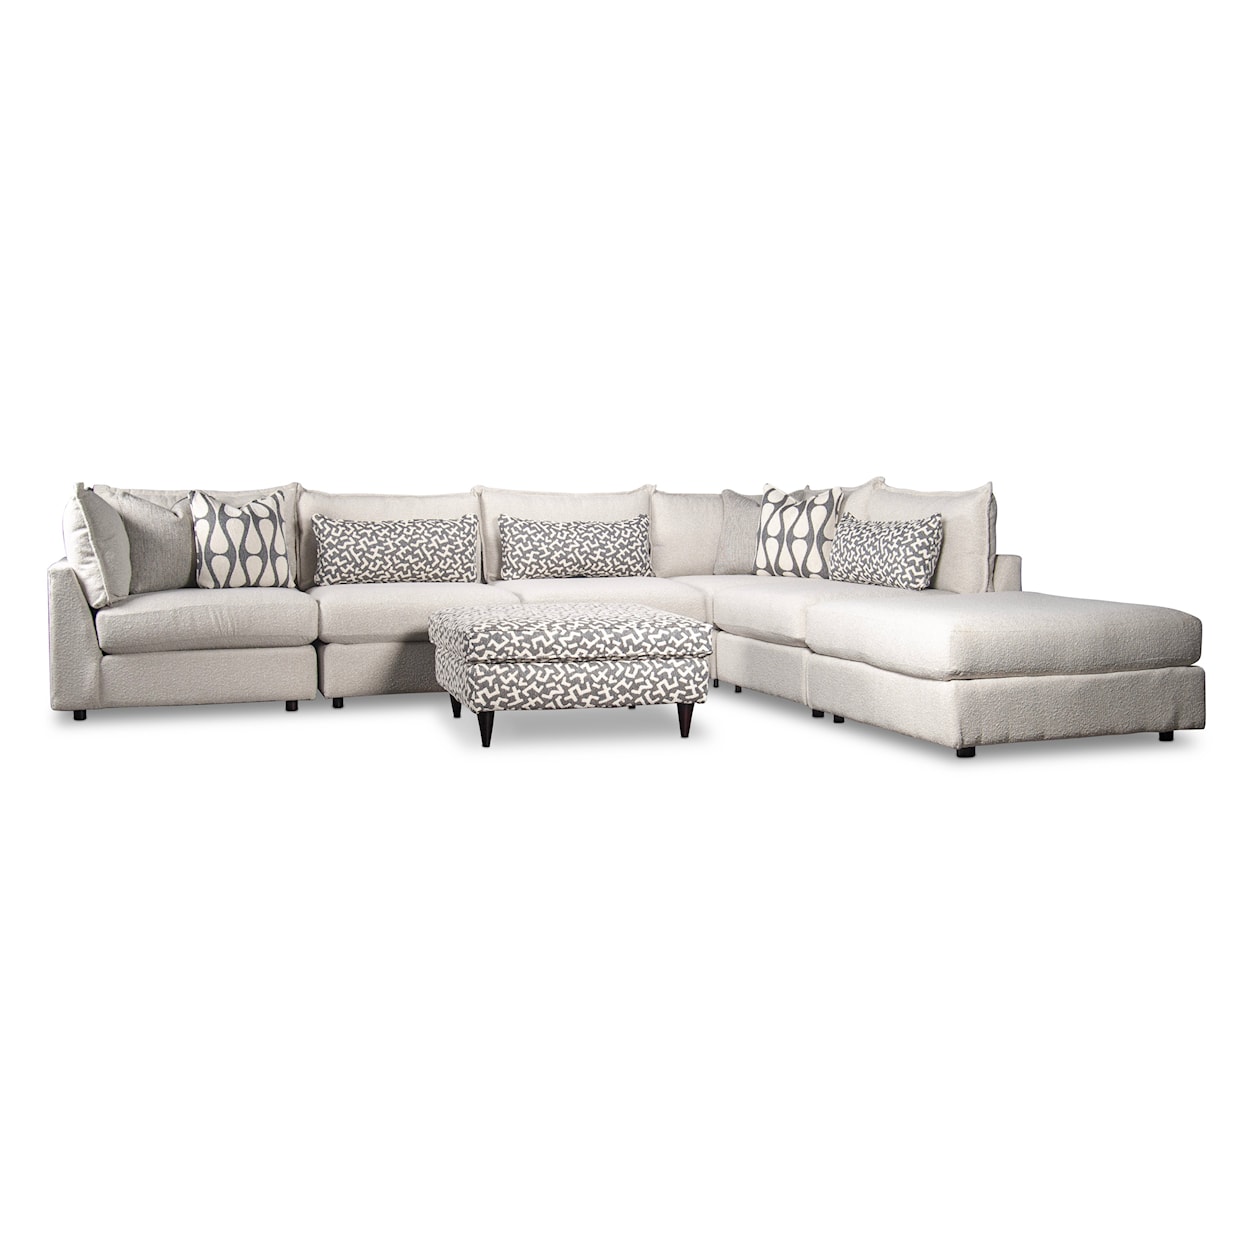 Fusion Furniture Cabo Cabo 6-Piece Sectional